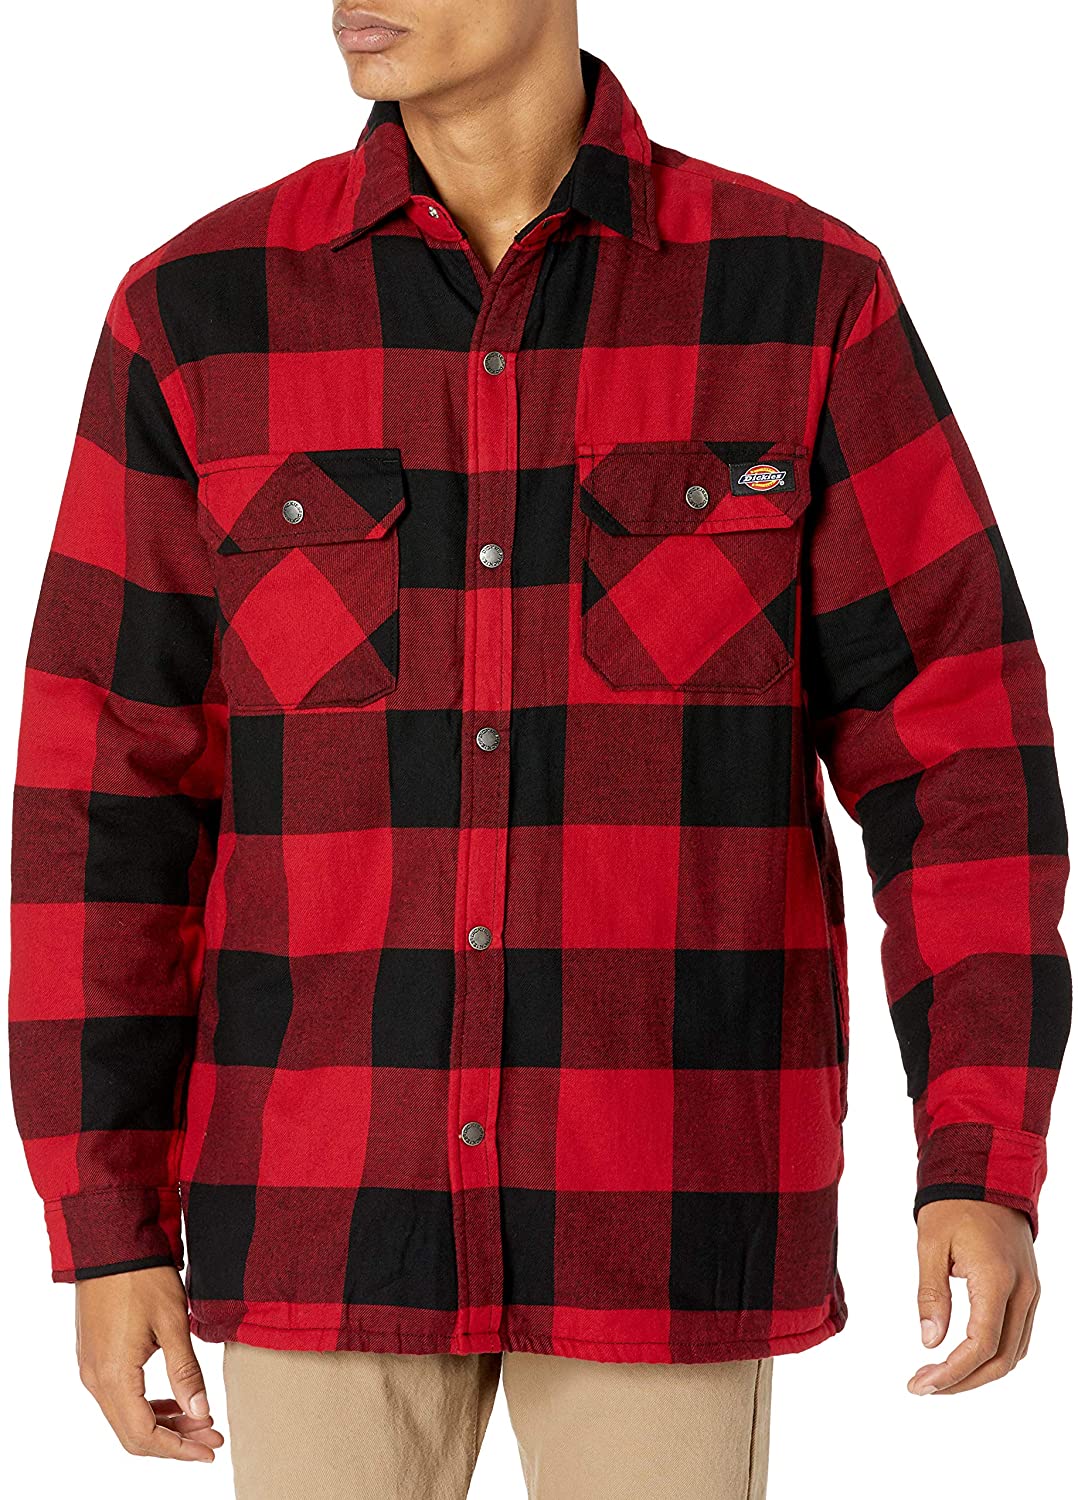 Dickies Men's Sherpa Lined Flannel Shirt Jacket with Hydroshield 